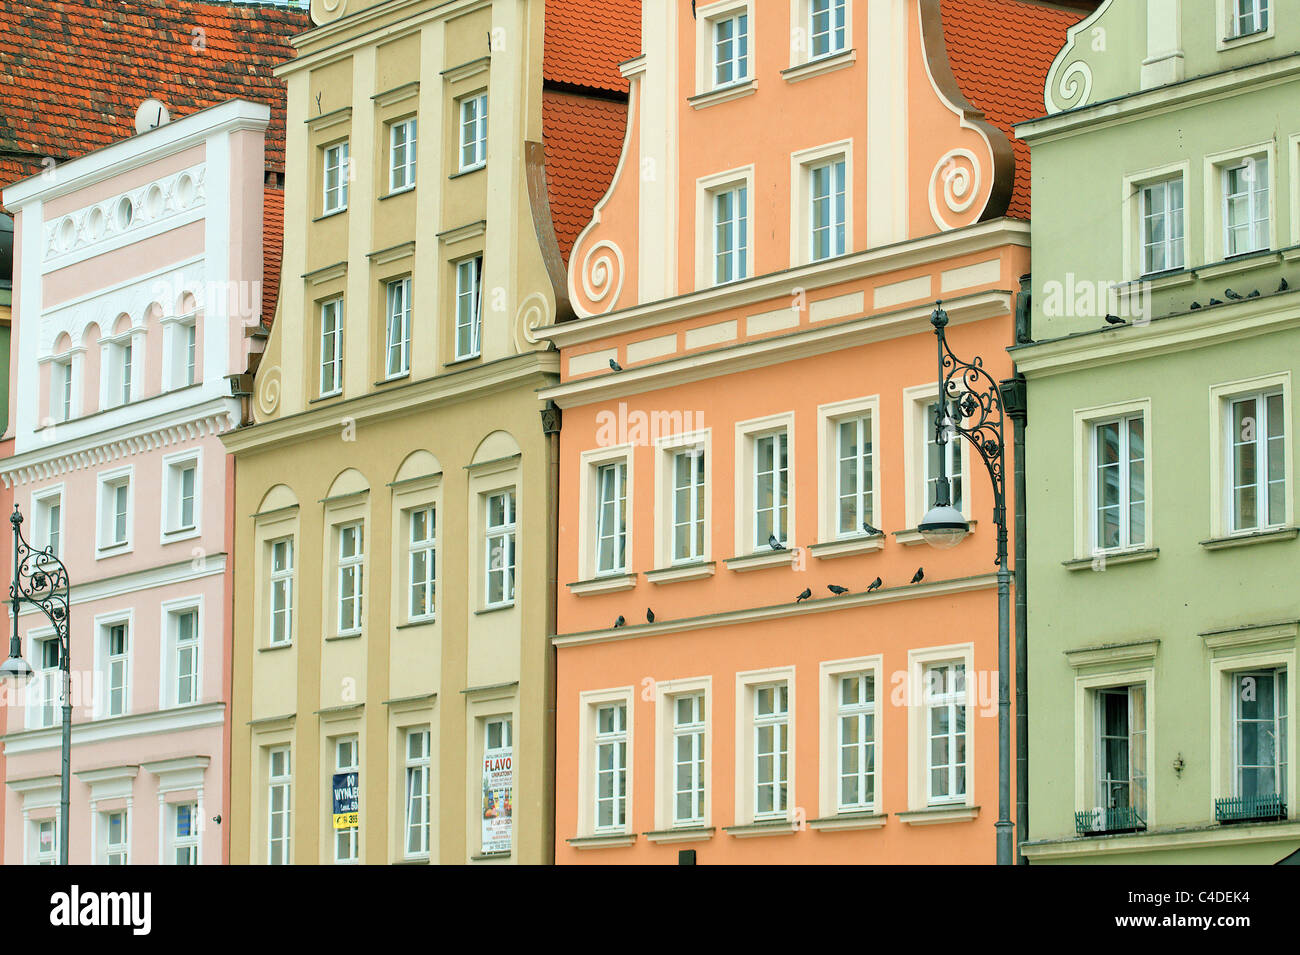 Wroclaw Colorful facades of tenement houses Stock Photo